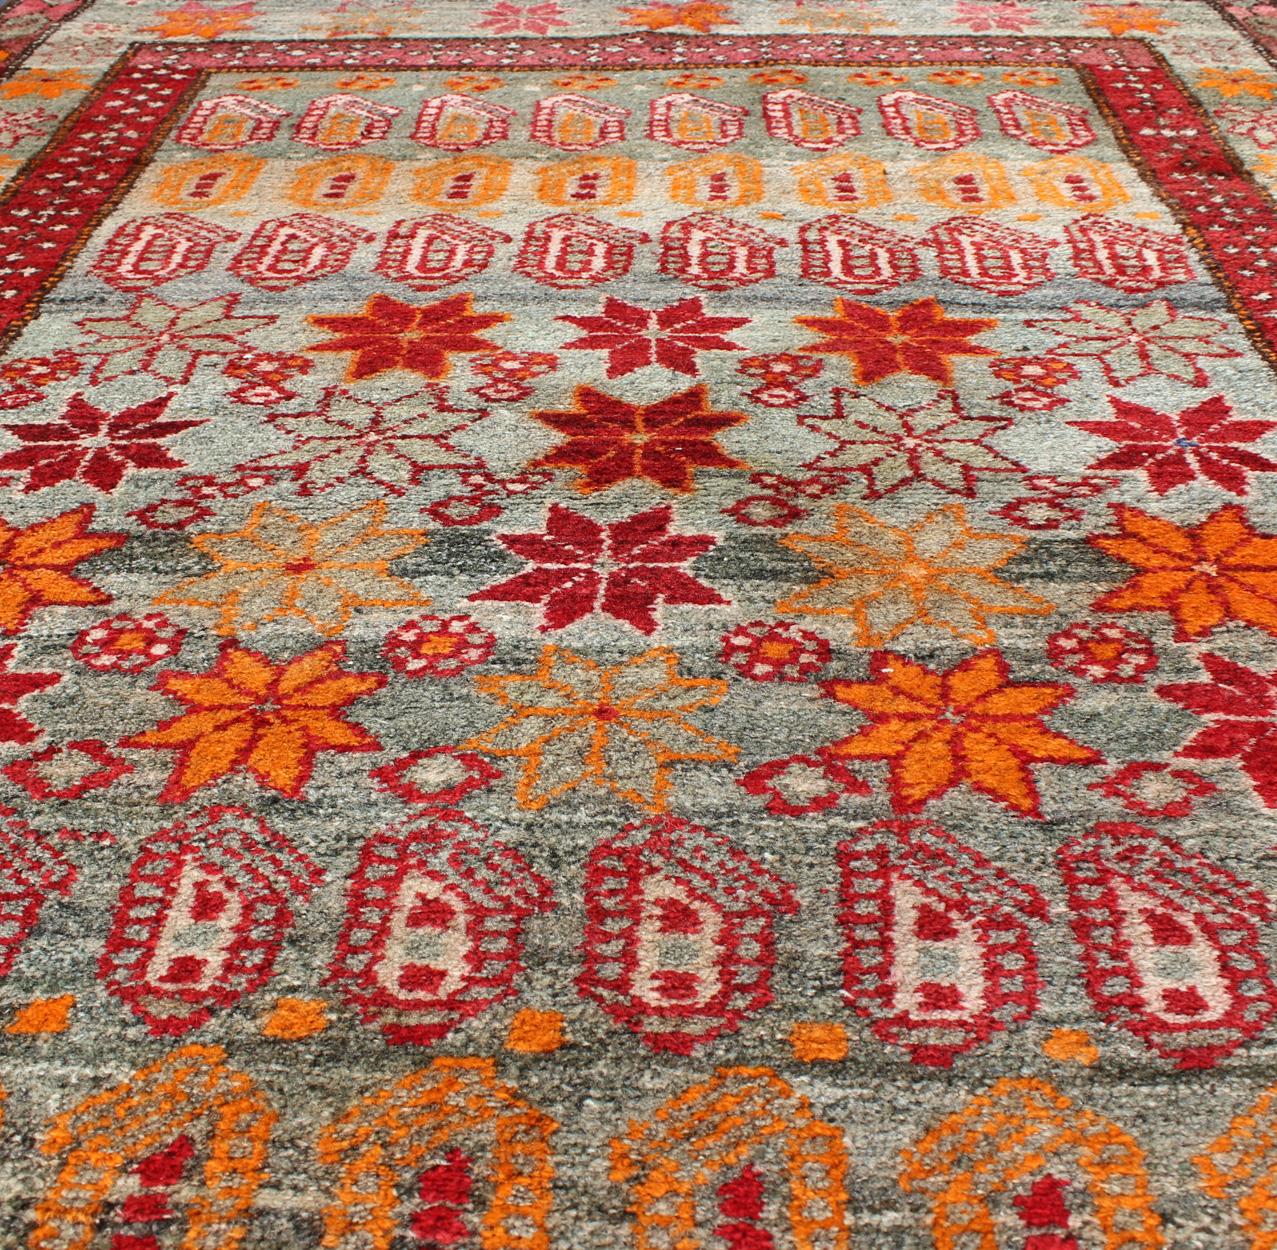 Mid-20th Century Colorful Vintage Persian Hamedan Rug with All-Over Motif Design For Sale